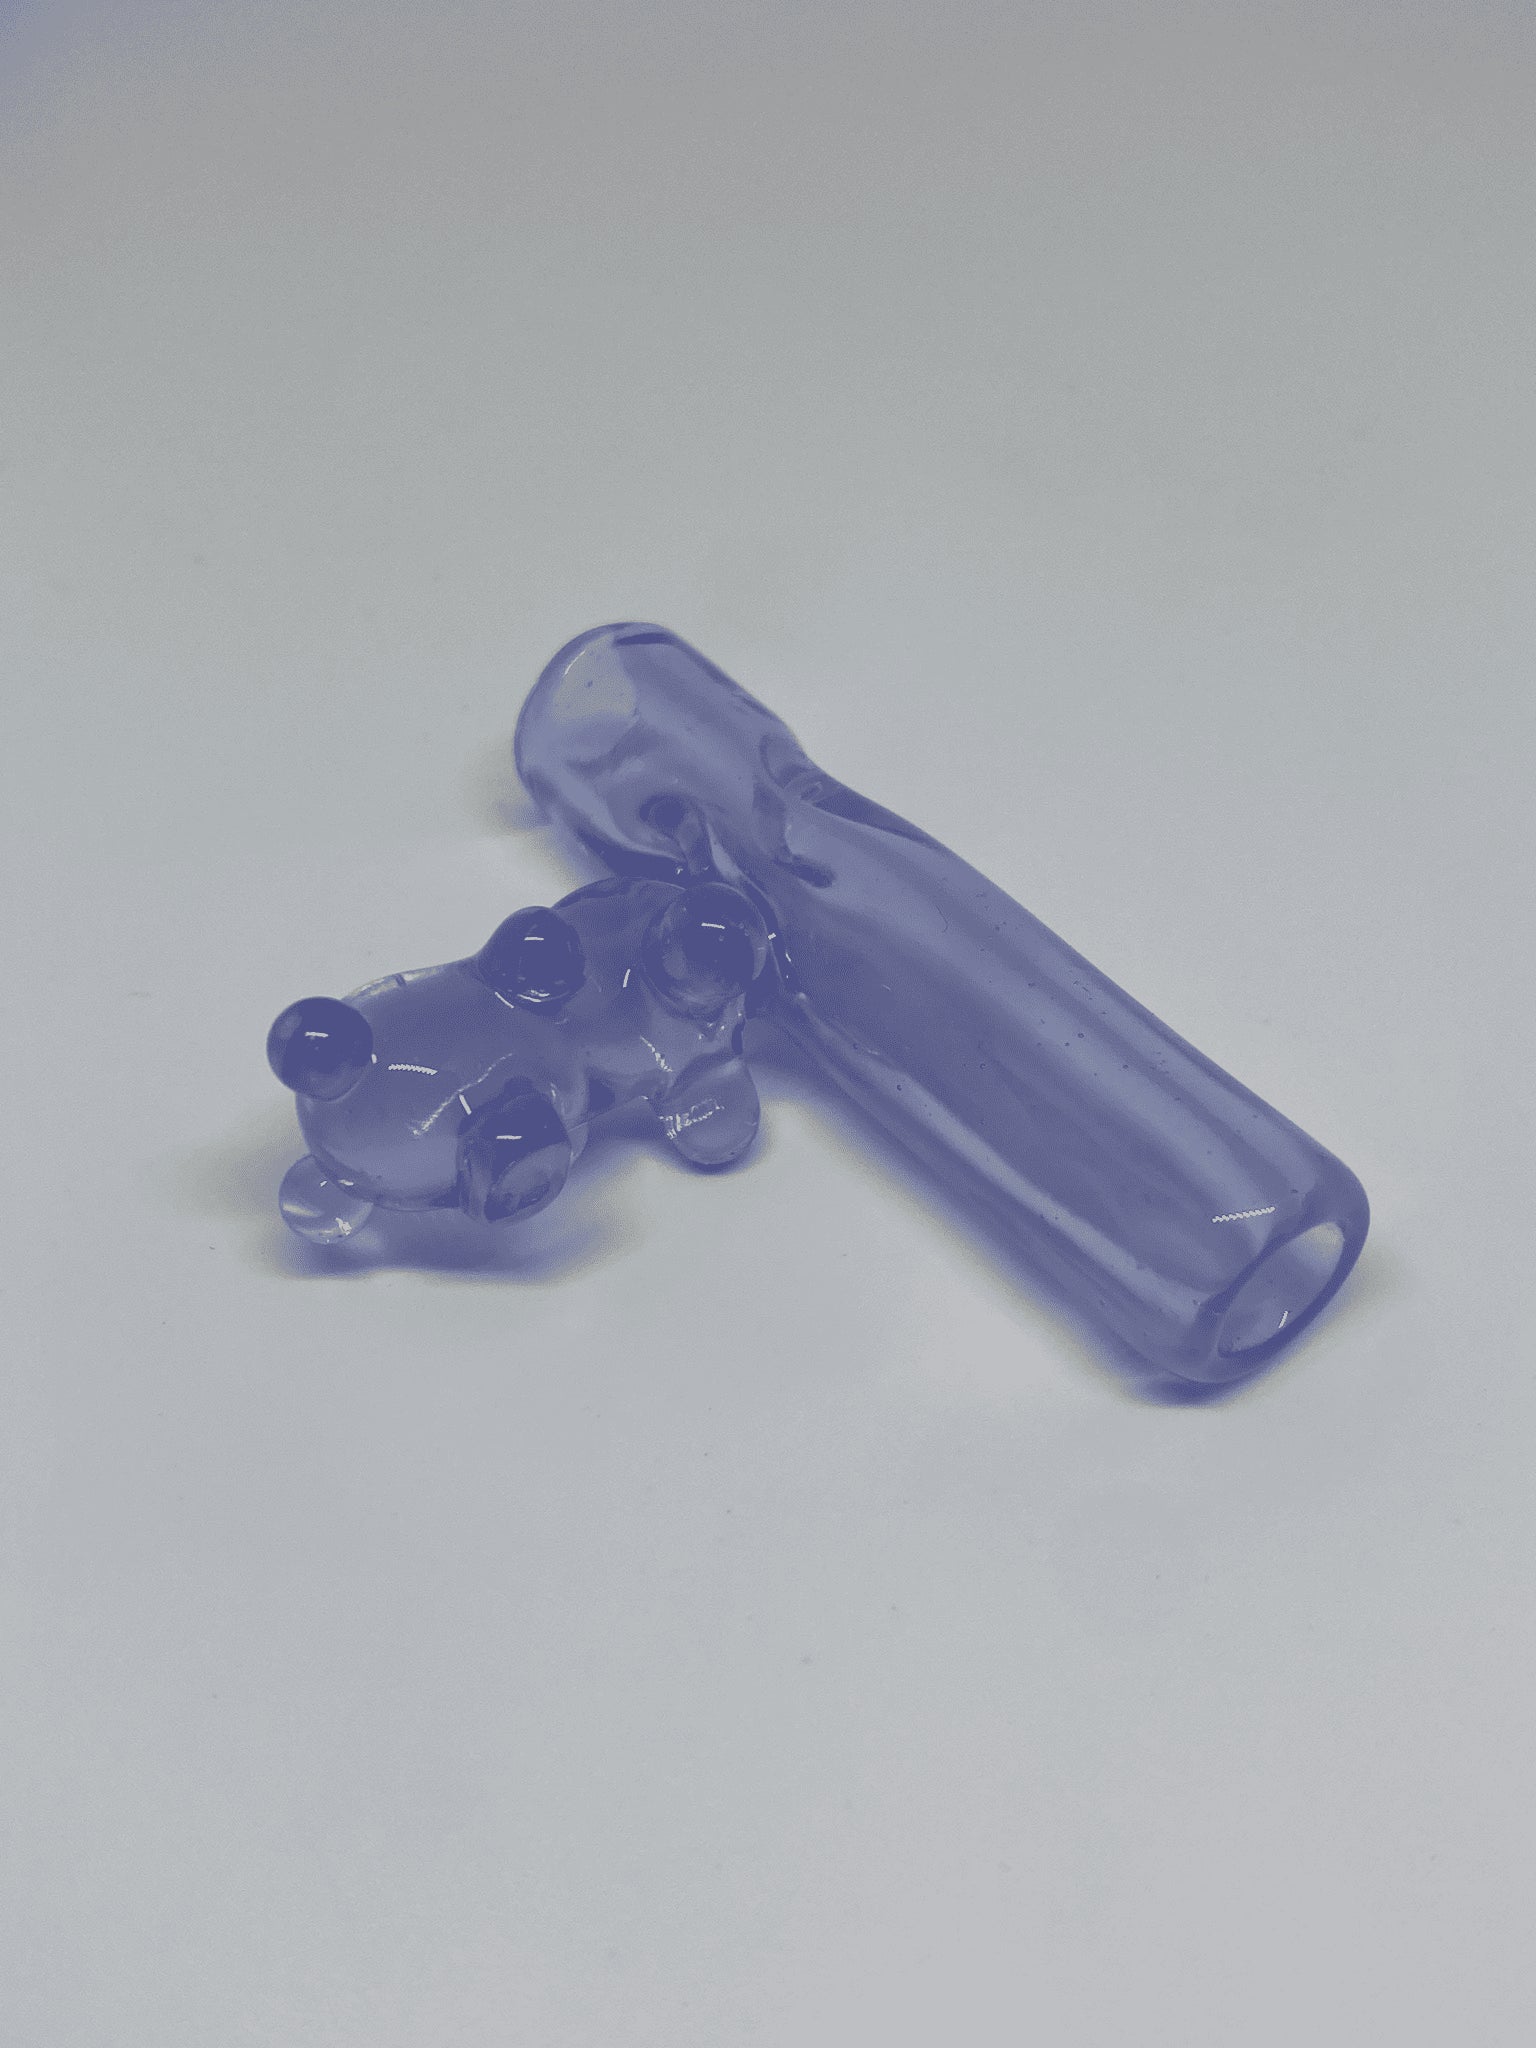 artisan-crafted art piece - Heady Bear Tip (M) by Alexander The Great Glass